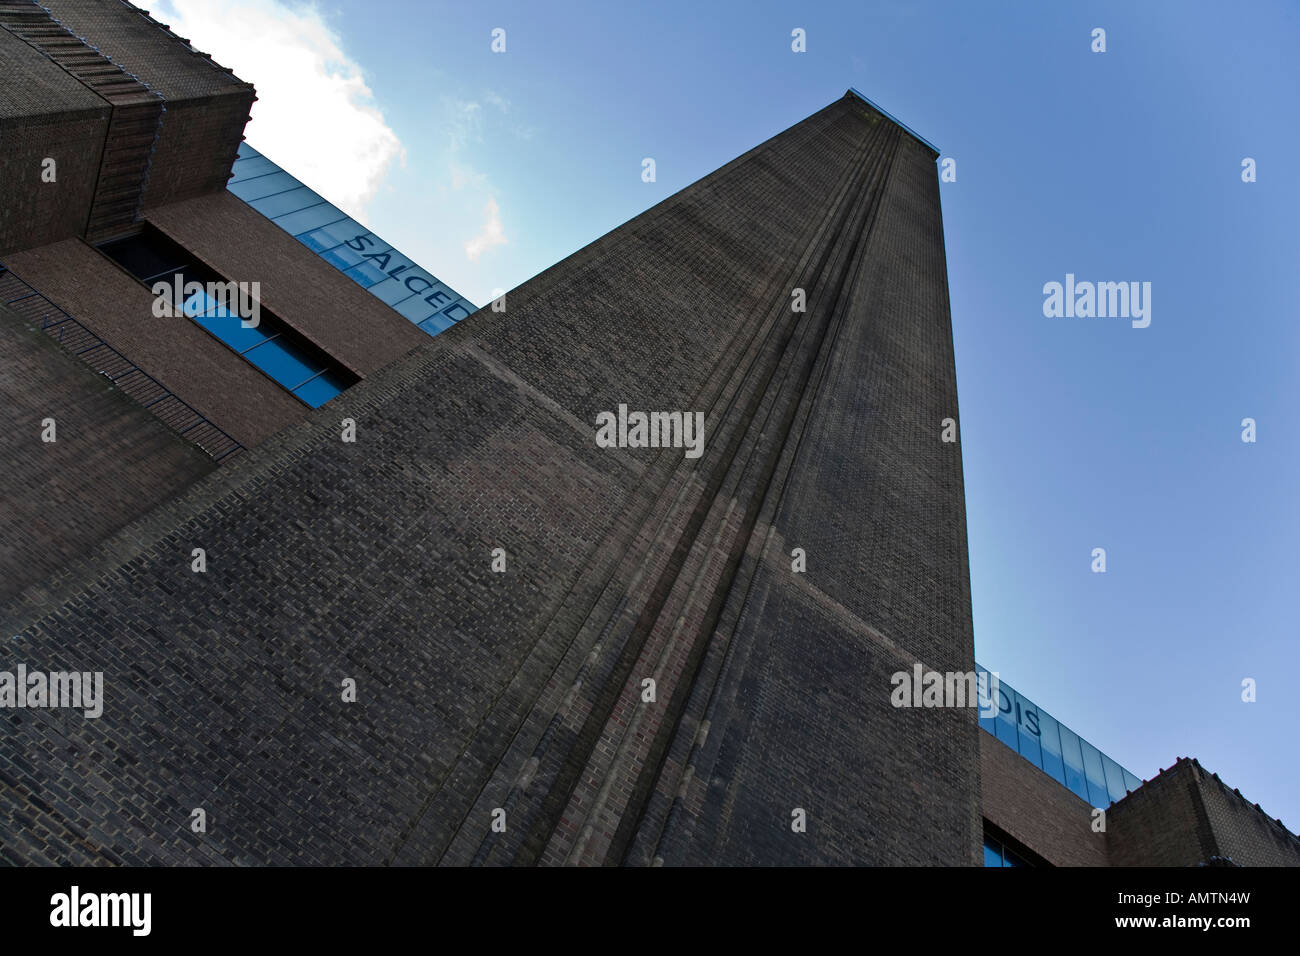 The front of Tate Modern art gallery formally Bankside Power Station and designed by Sir Giles Gilbert Scott, London, England. Stock Photo